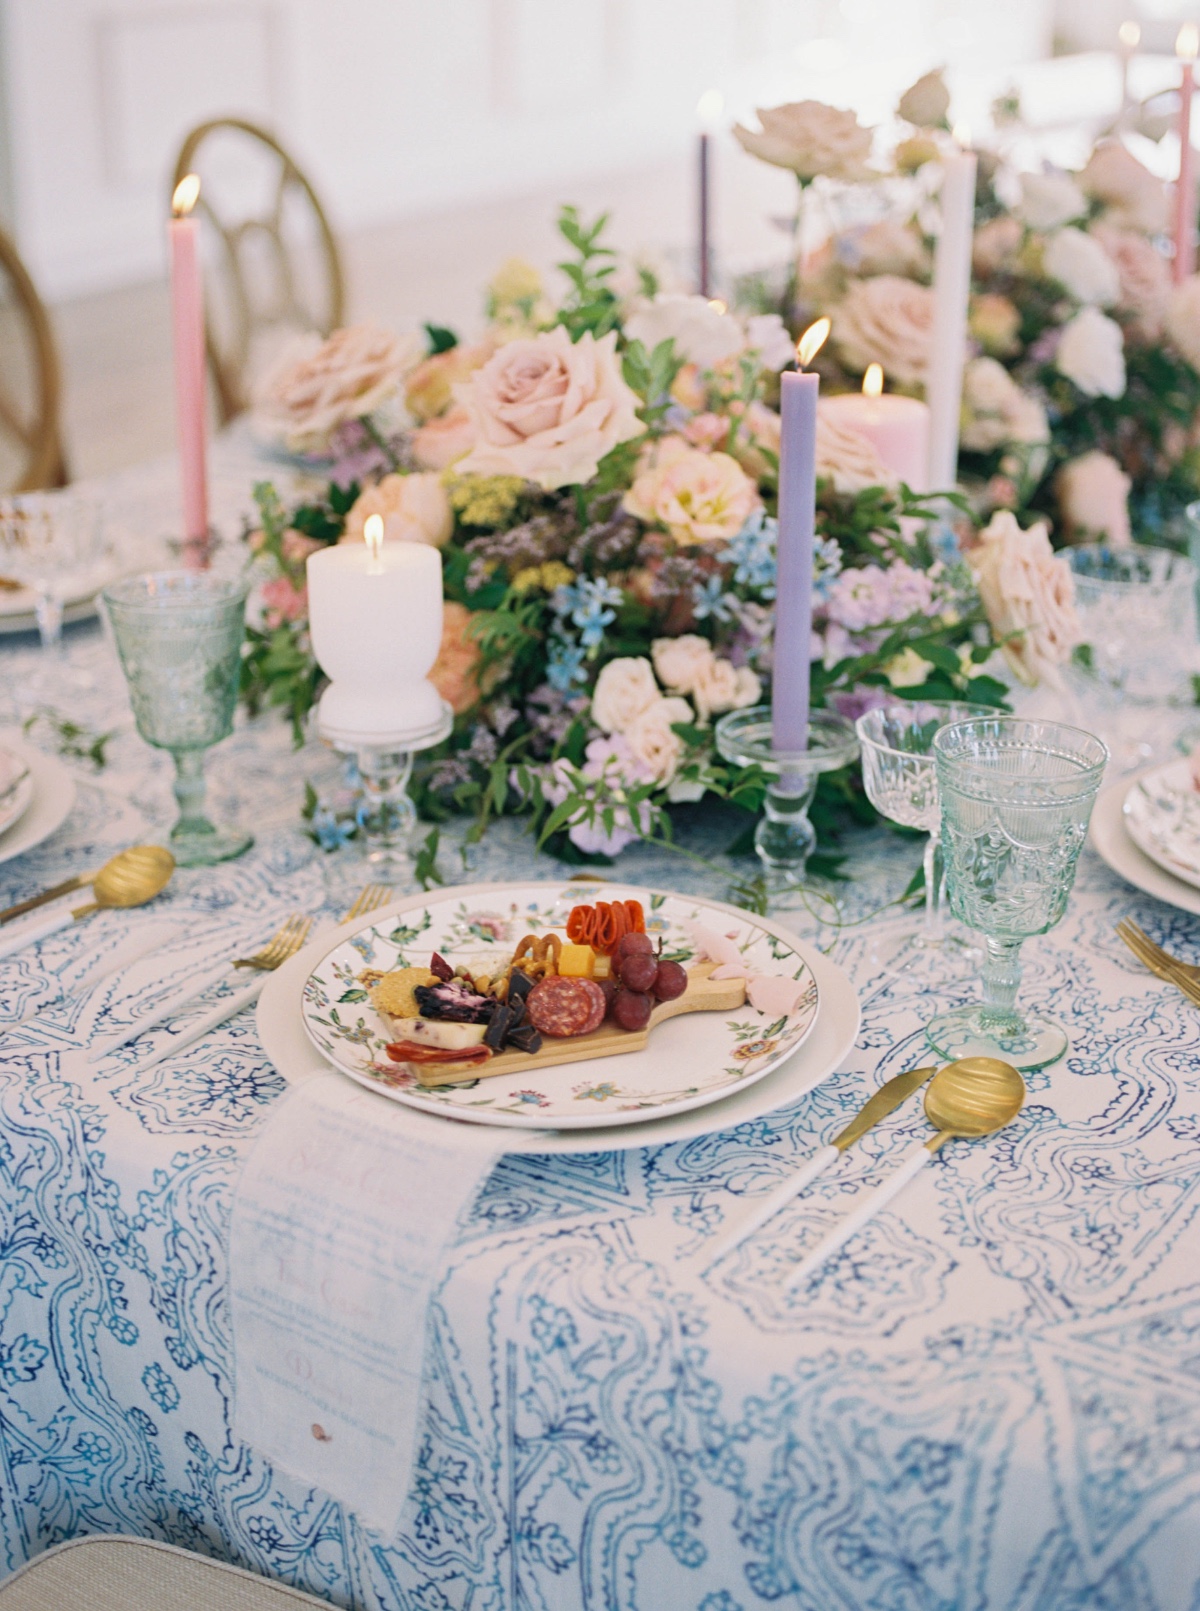 French blue and white tablecloth